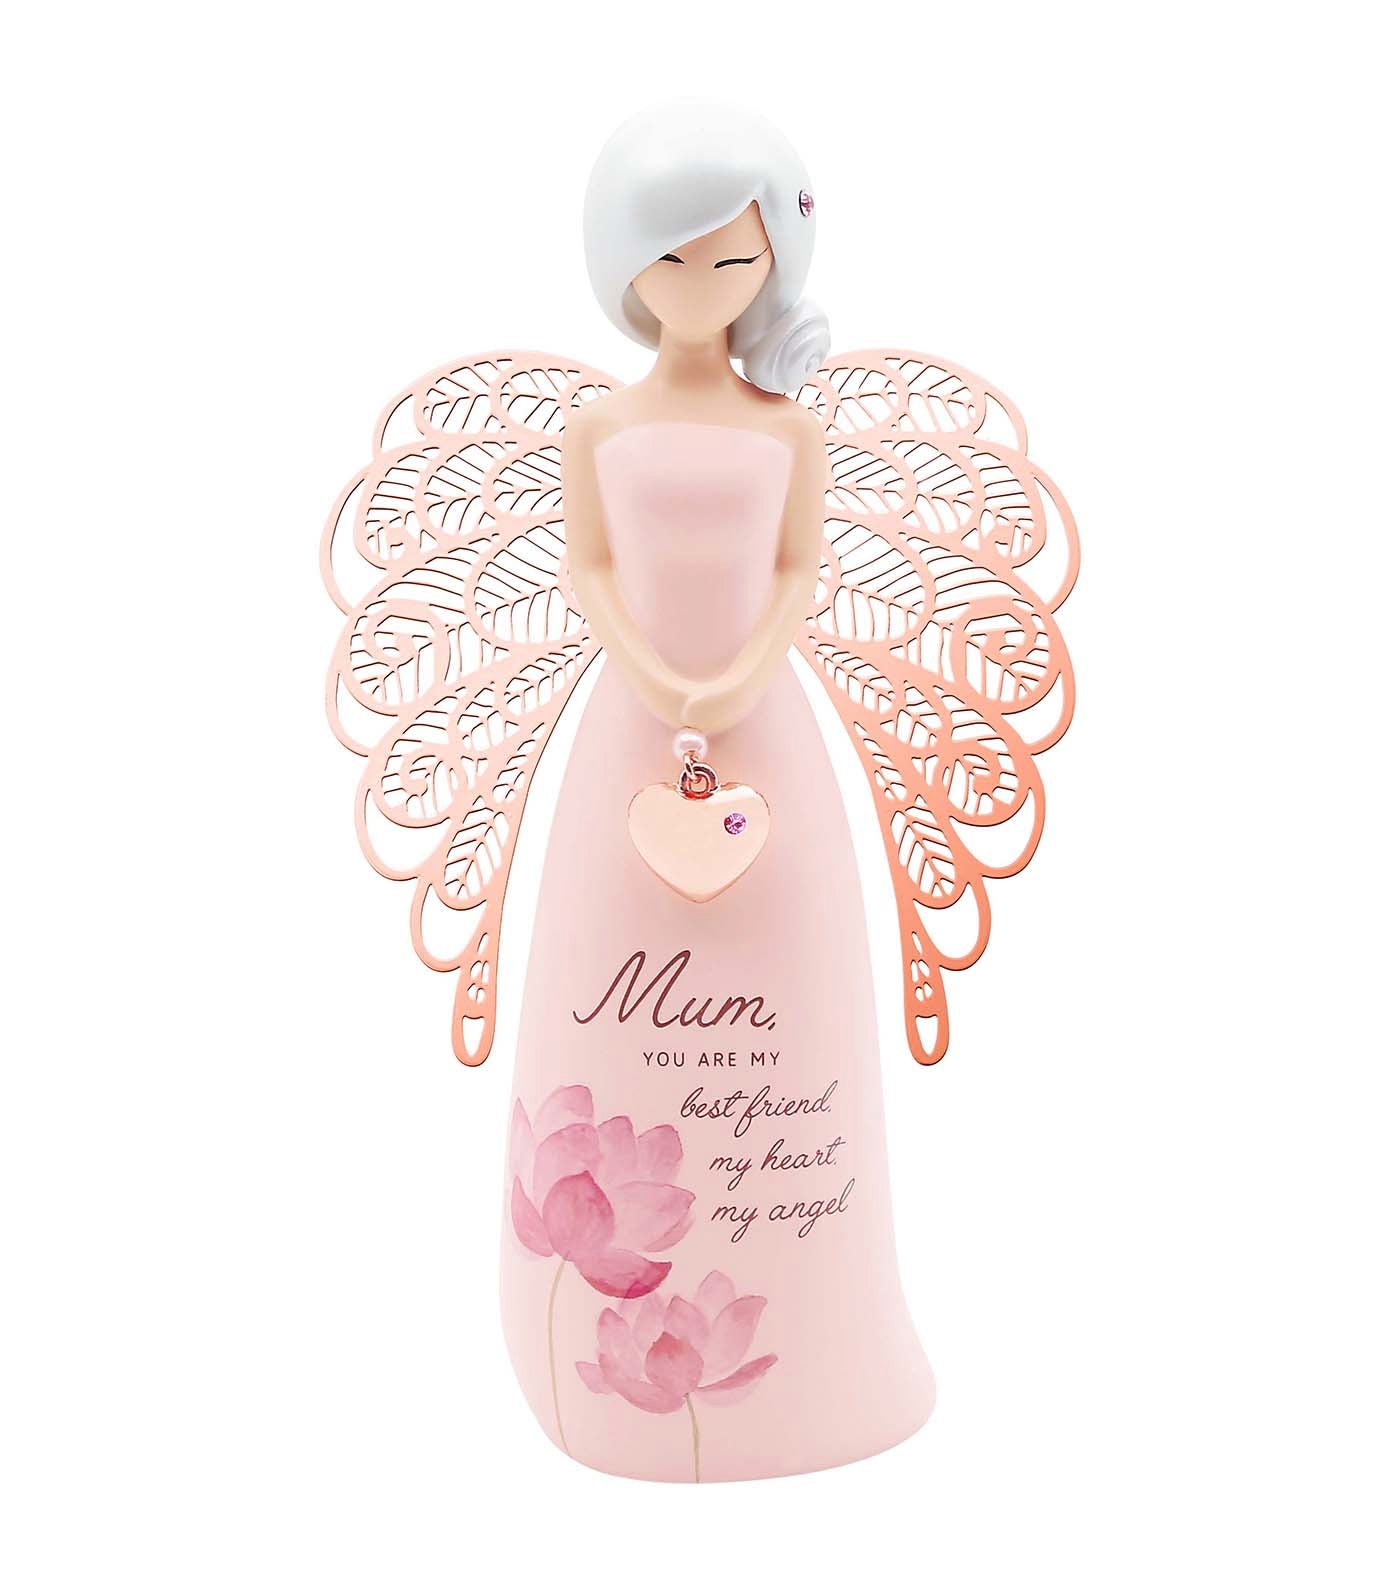 One Family You Are An Angel Figurine - "Mum you are my bestfriend, my heart, my angel"